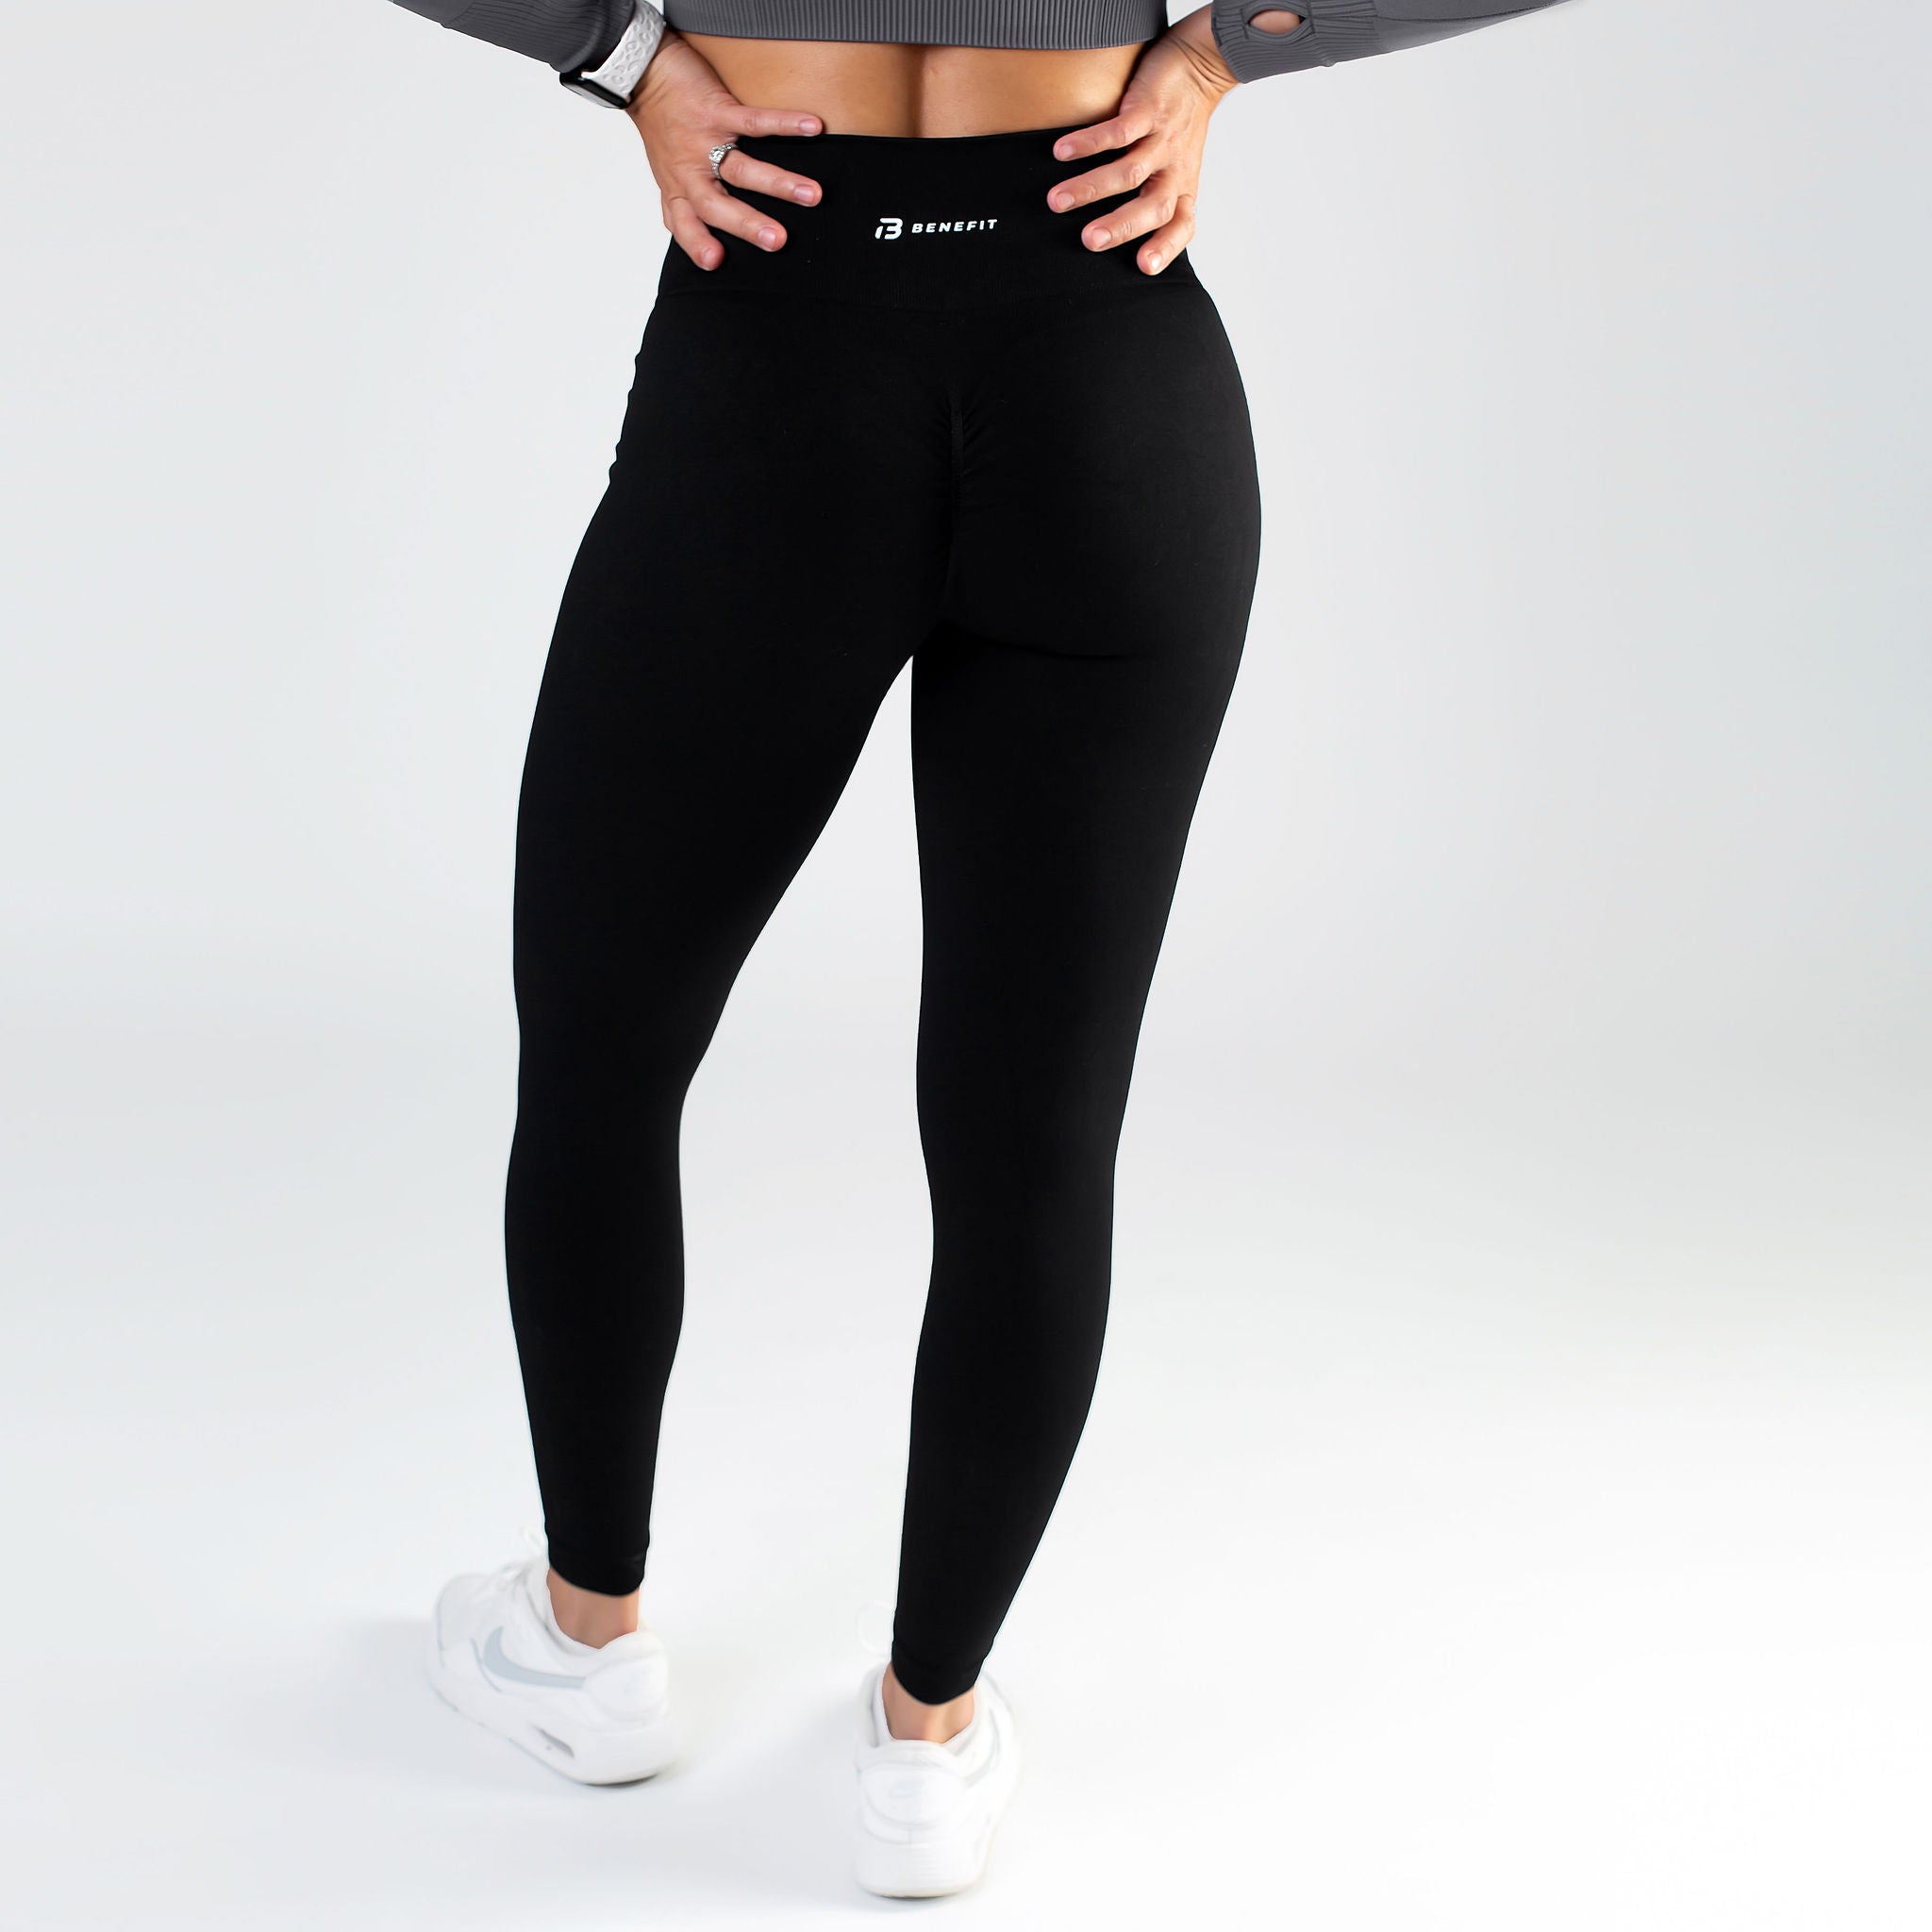 High-Quality Women's Leggings for Active Lifestyles